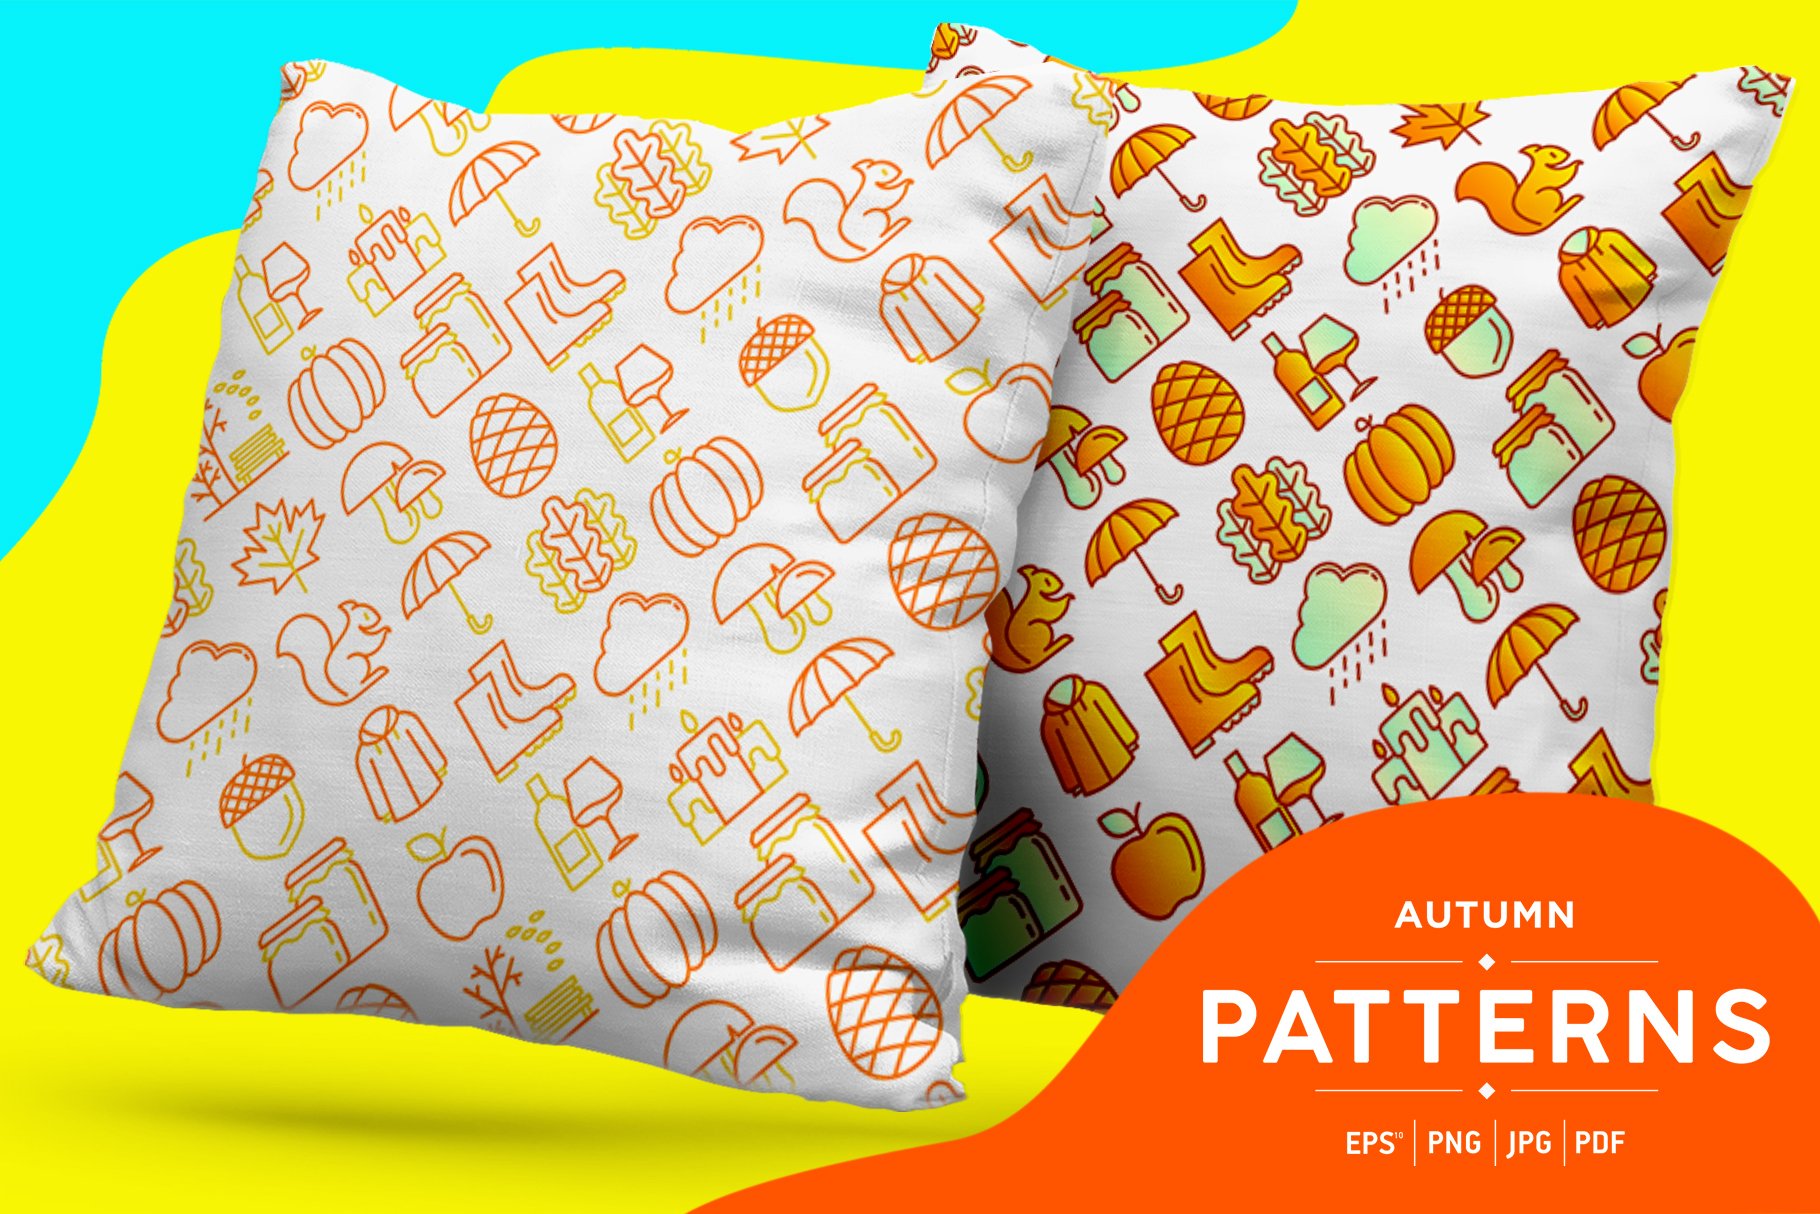 Autumn Patterns Collection cover image.